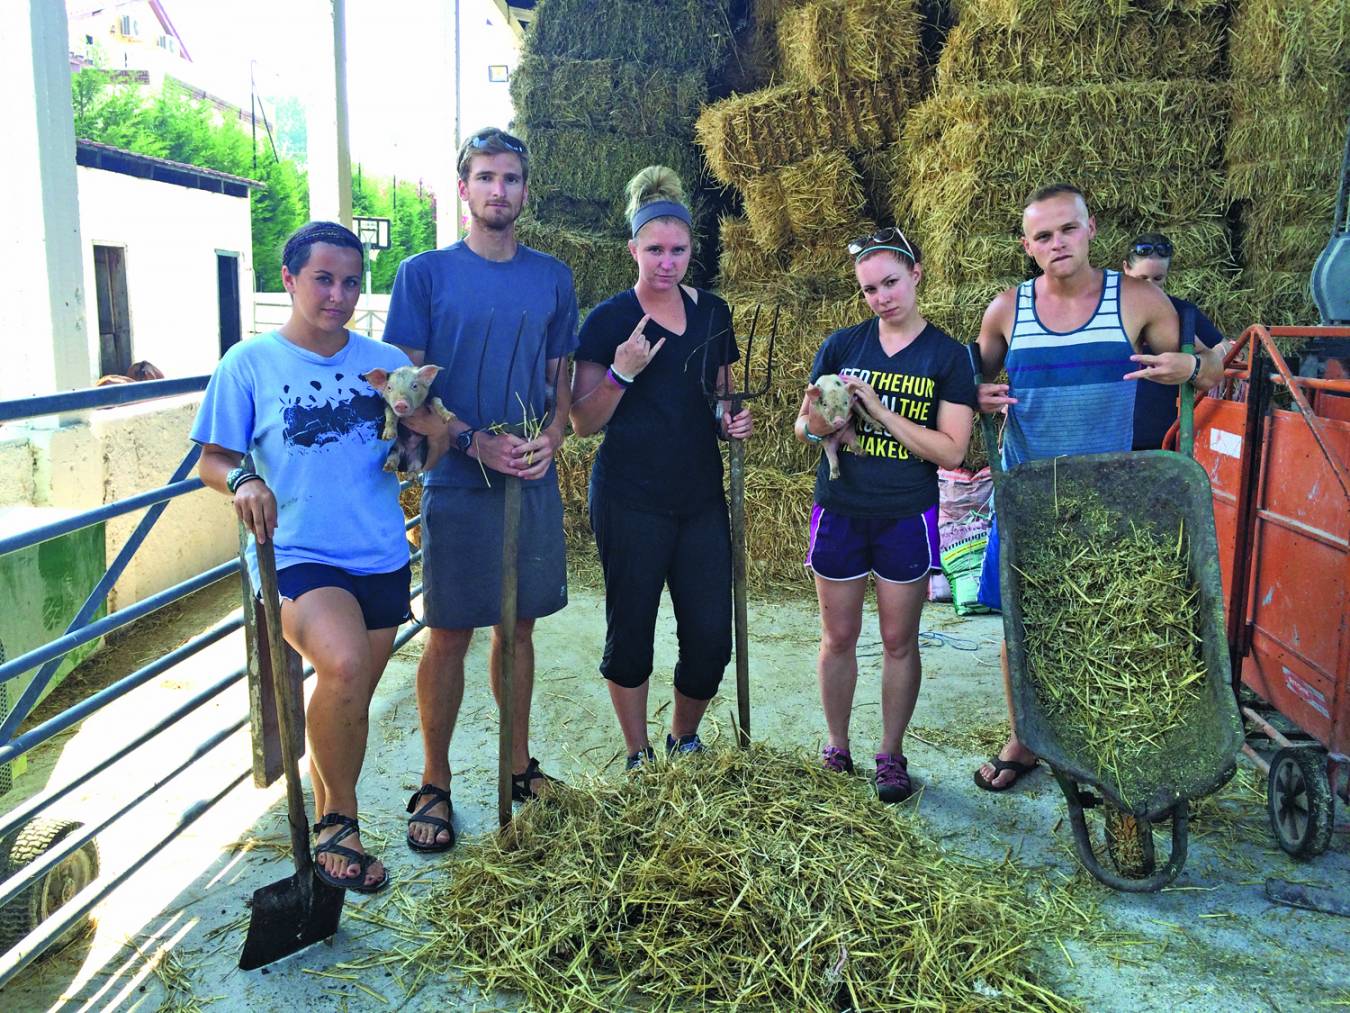 Rector and her group of Adventures in Missions participants pitch hay in Albania.